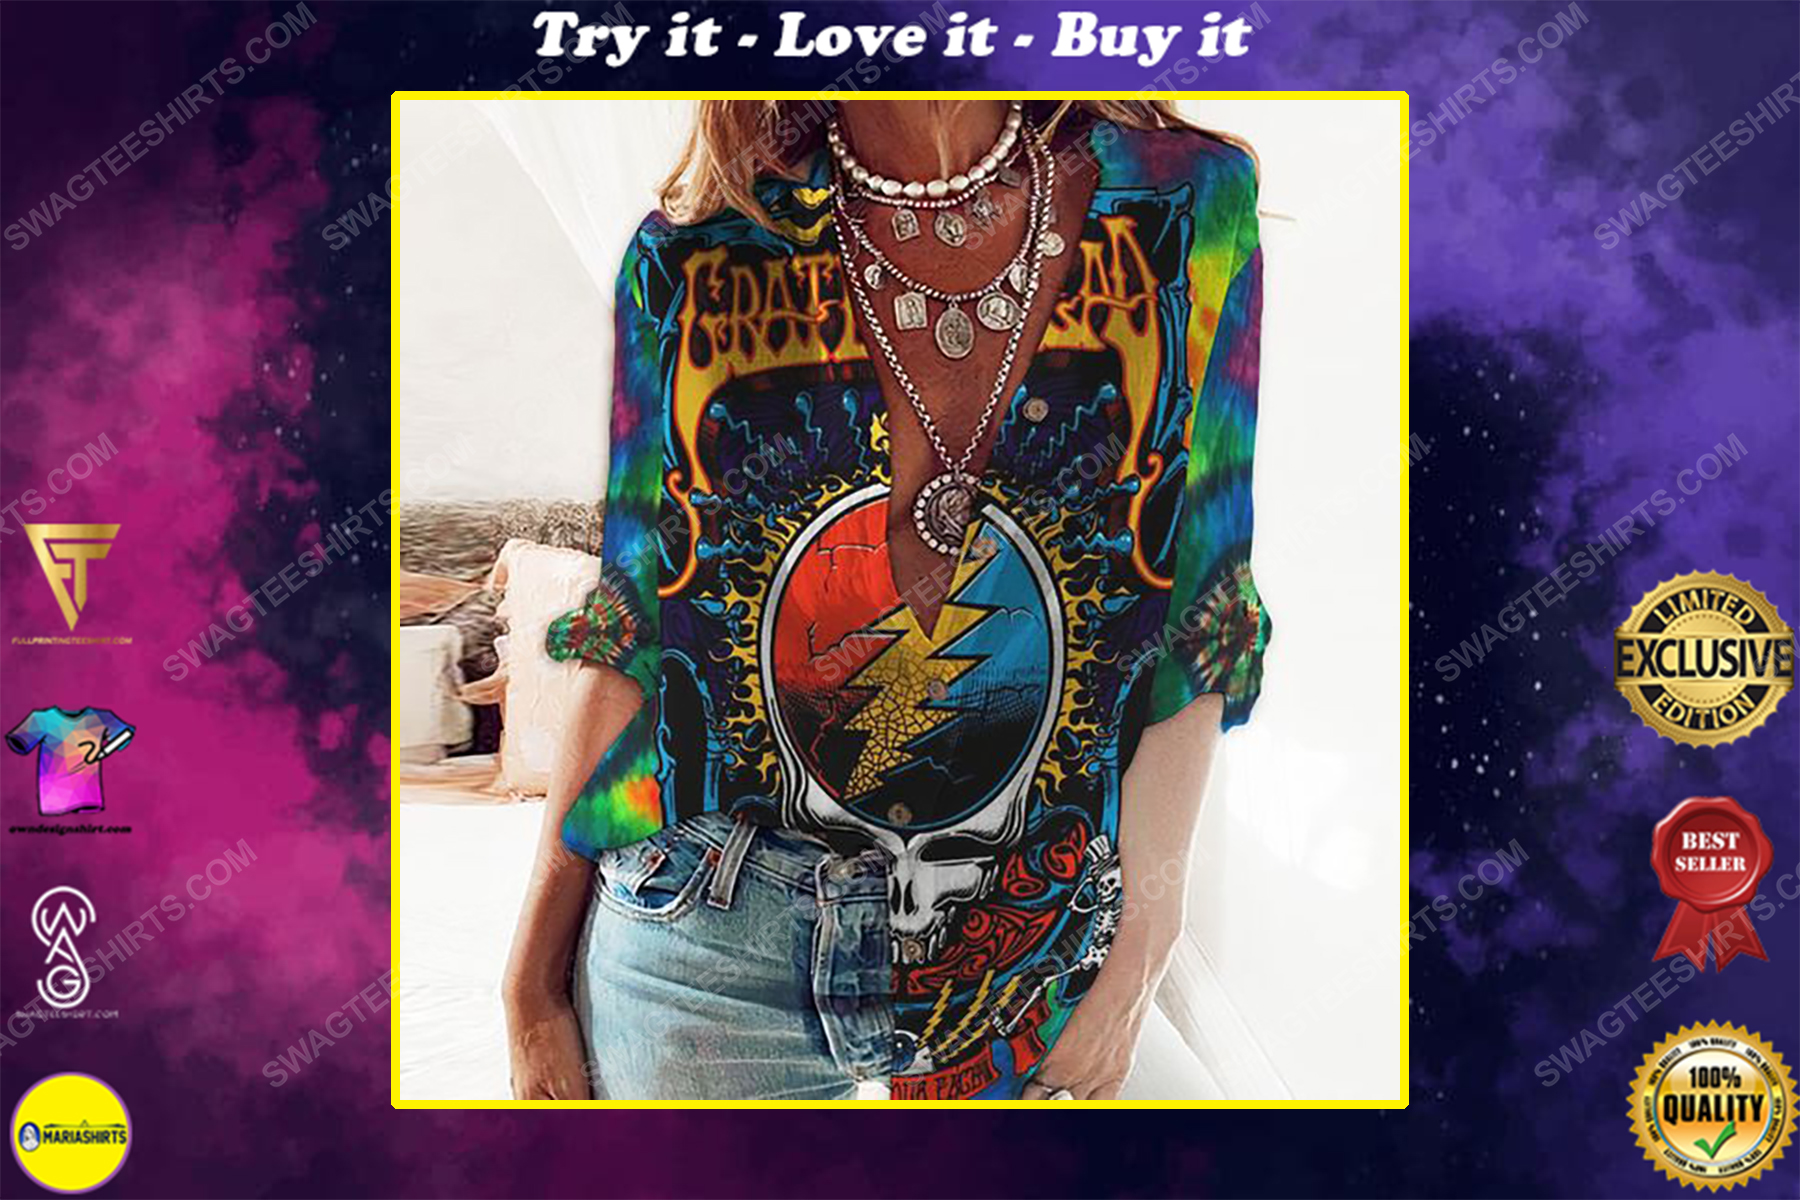 Hippie tie dye grateful dead fully printed poly cotton casual shirt